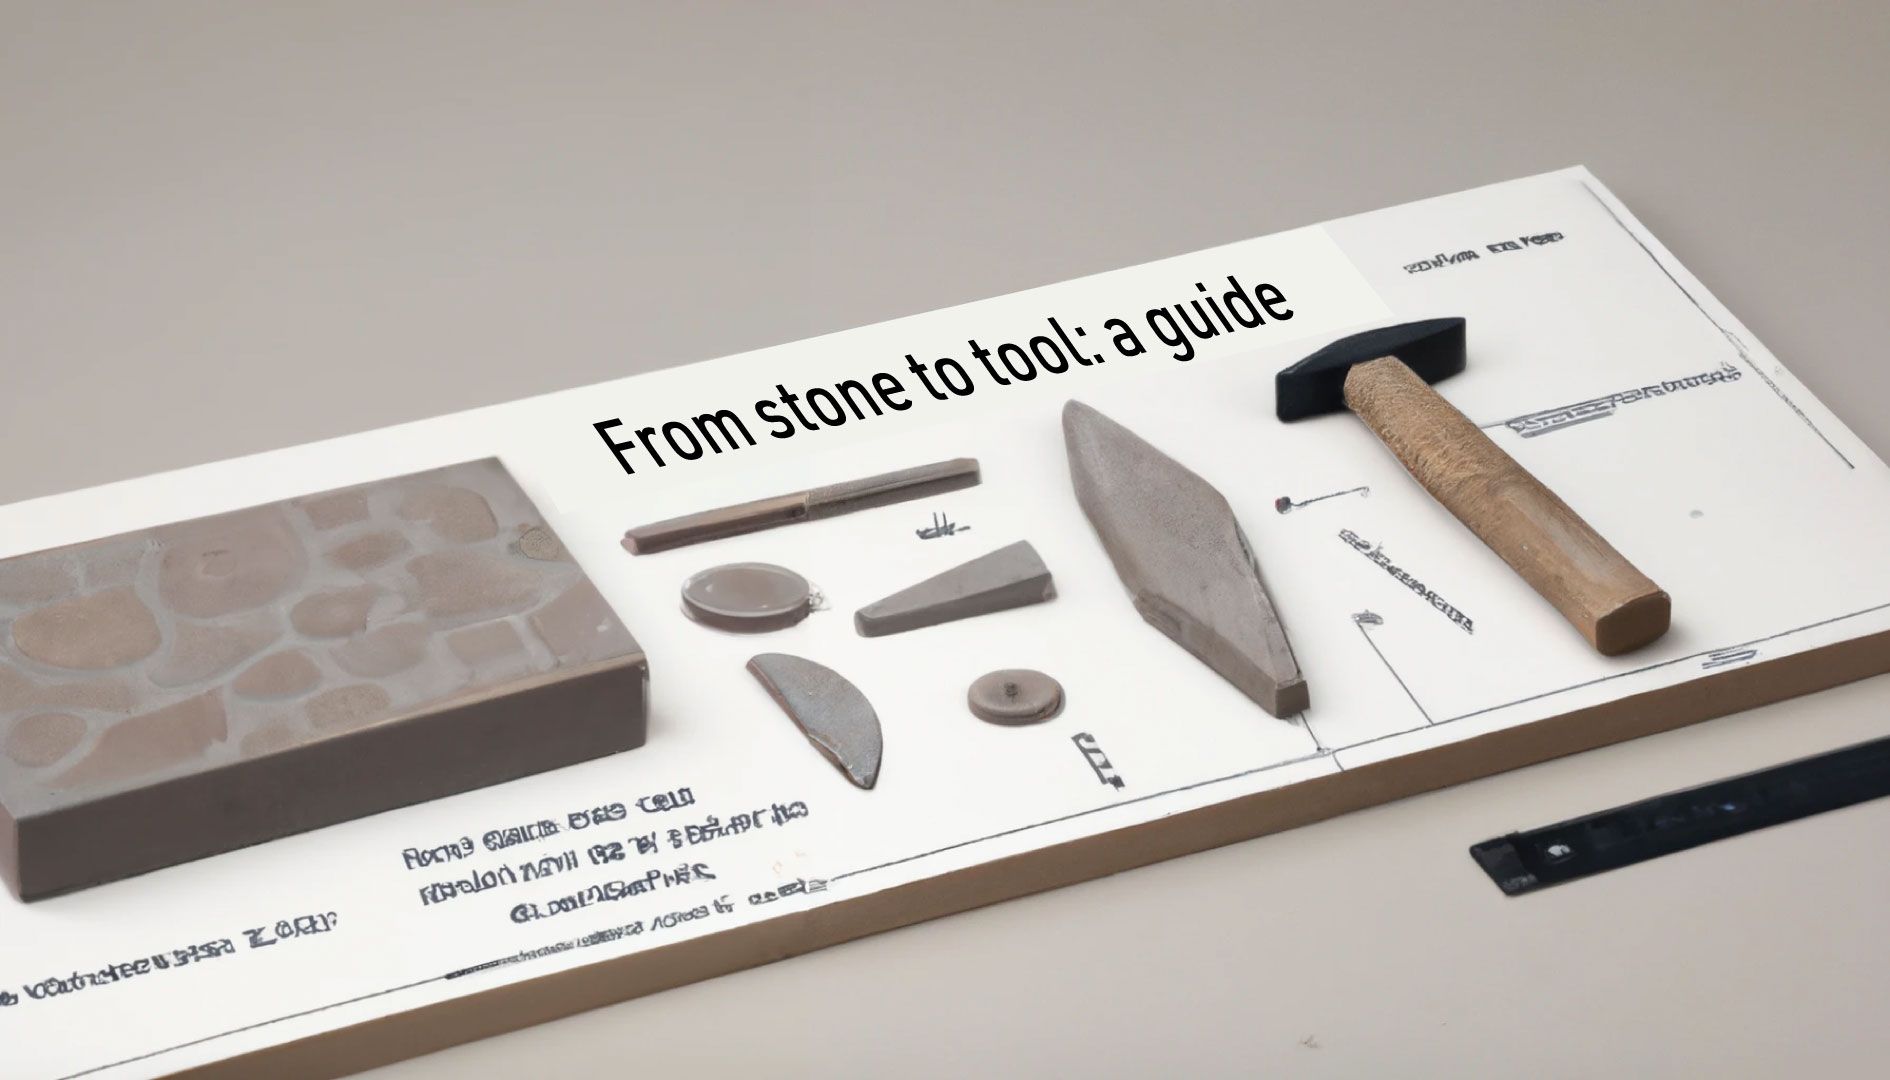 An instruction board with stone objects labeled, "From stone to tool: a guide"